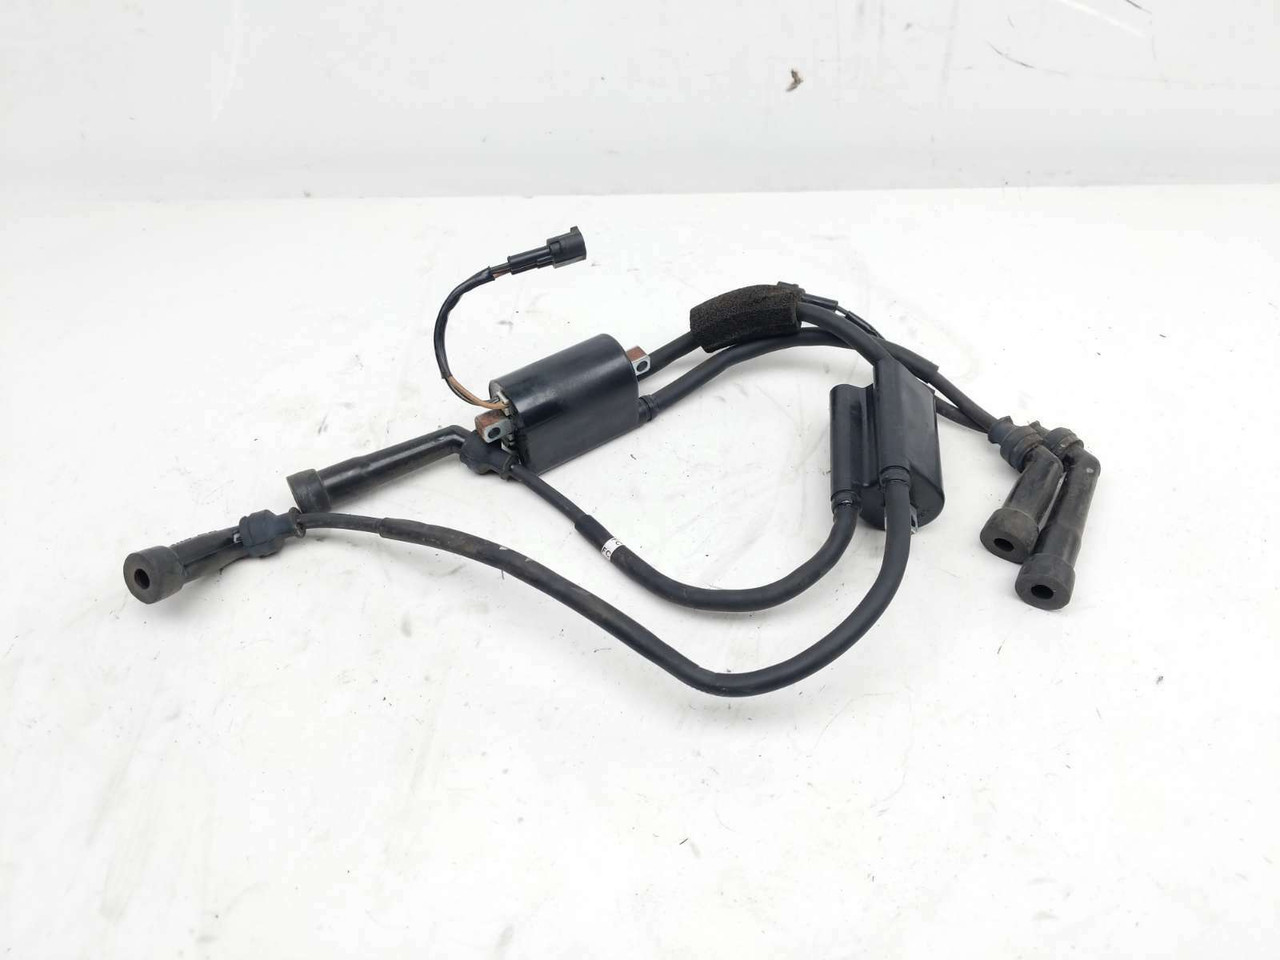 Ignition Coil Intruder 1400, Motorcycle Ignition Coil